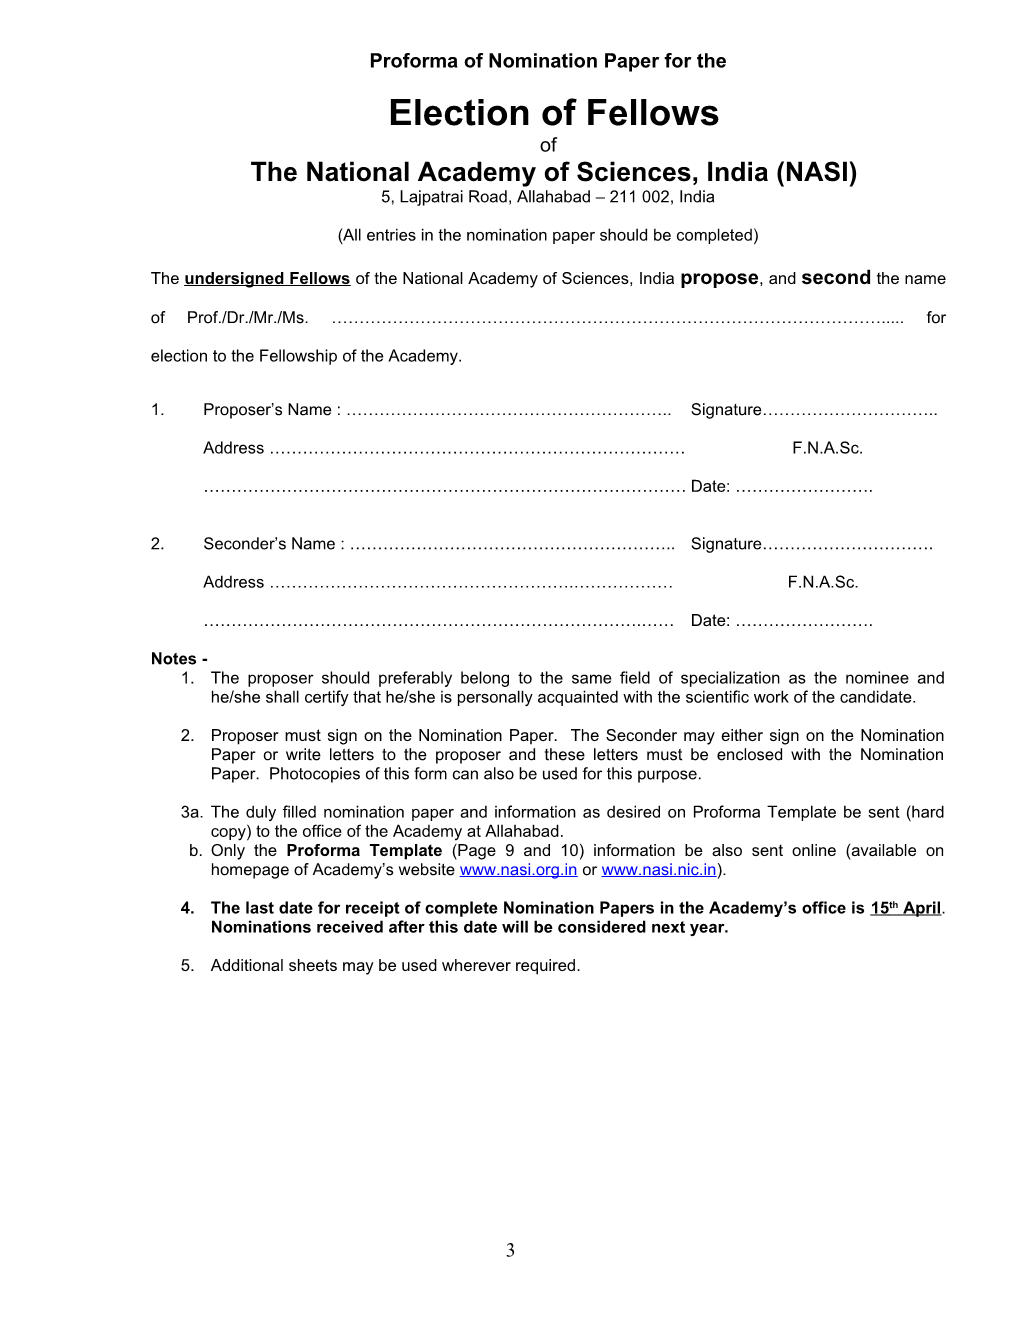 The National Academy of Sciences, India (NASI)